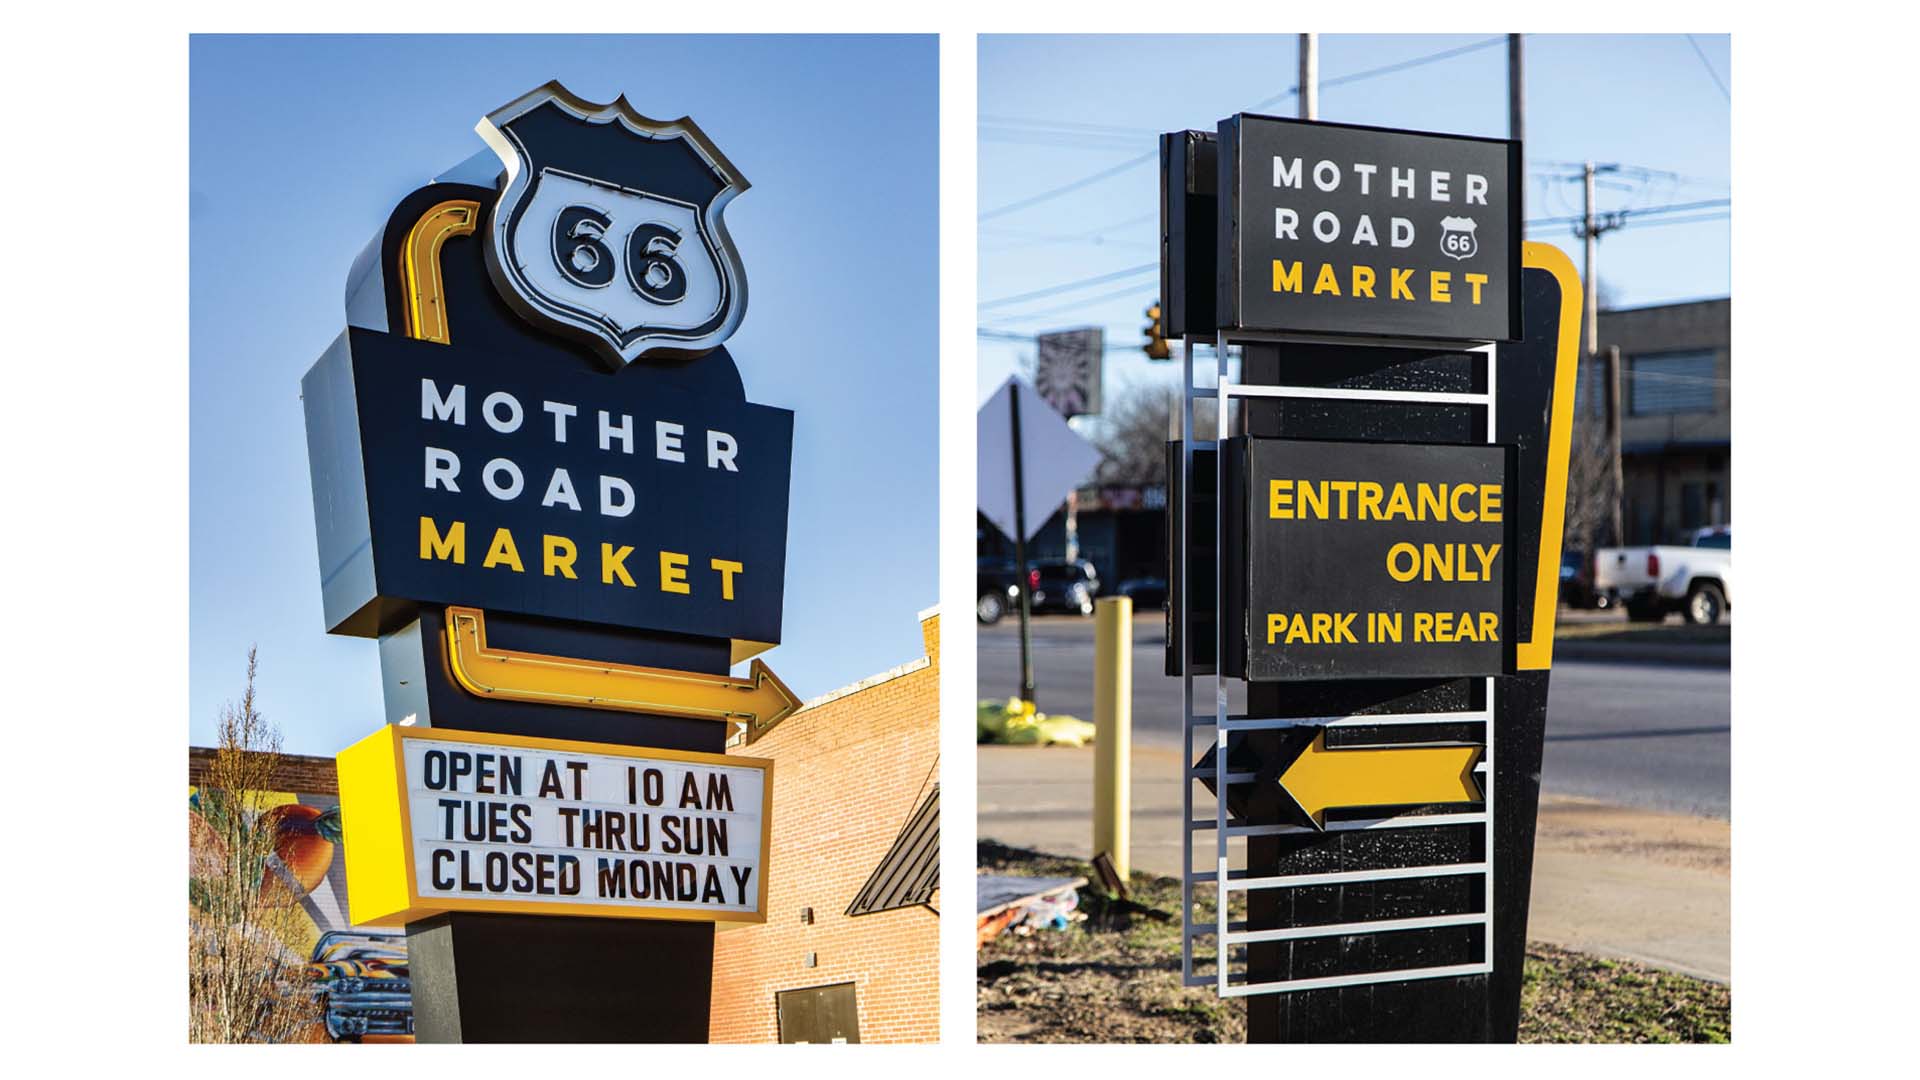 Outdoor signage for Mother Road Market in Tulsa, Oklahoma